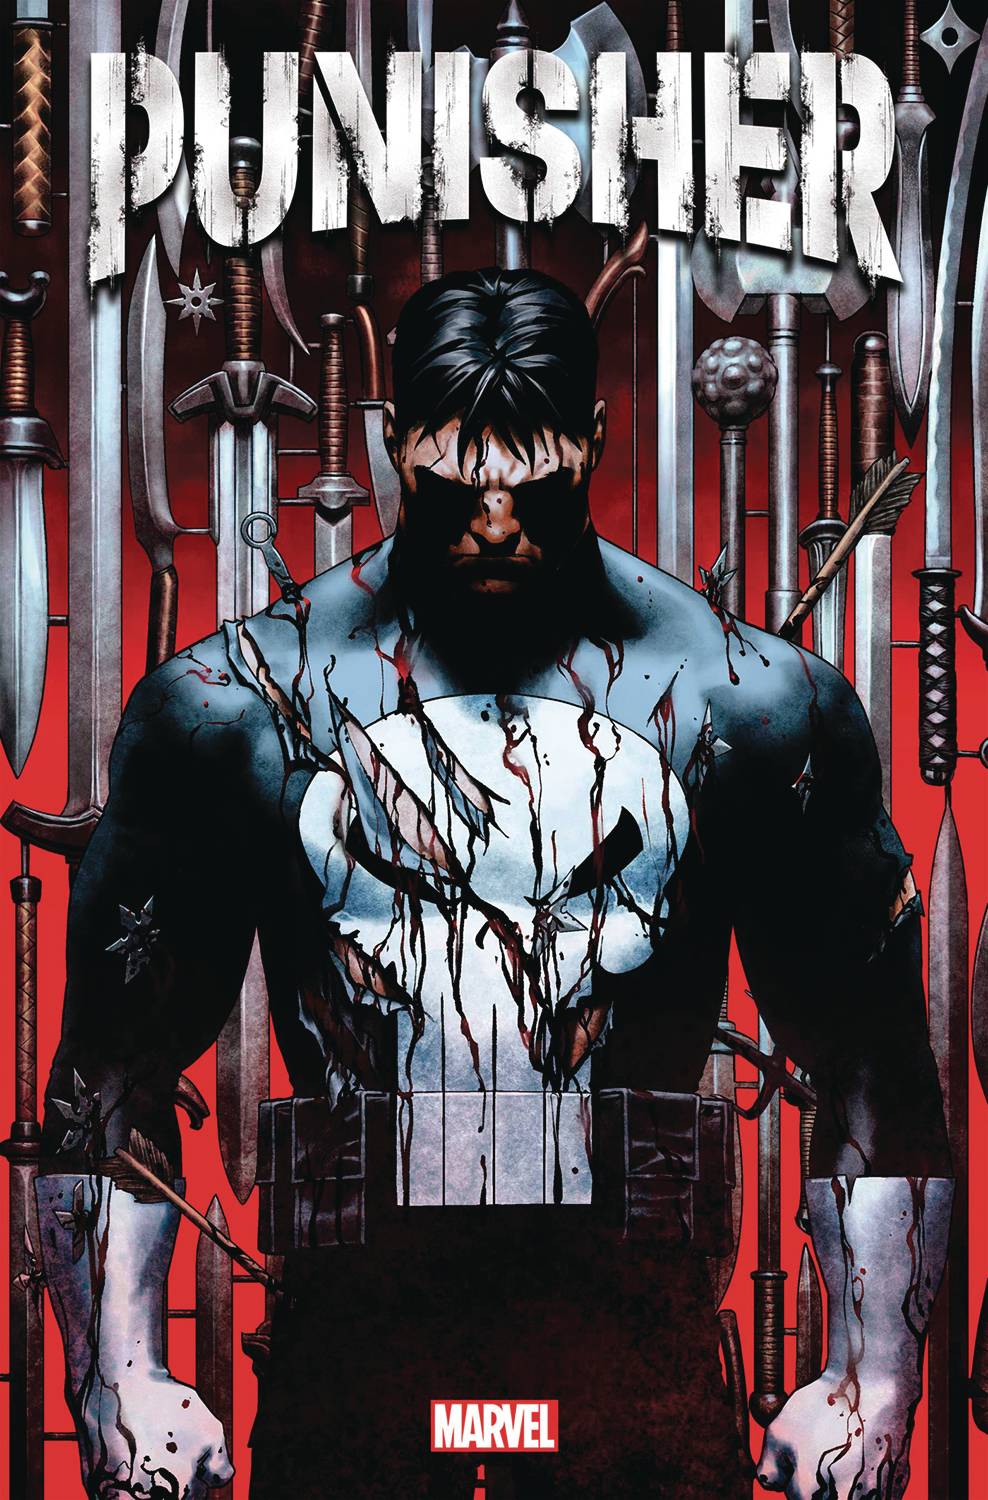 PUNISHER #1 | Game Master's Emporium (The New GME)